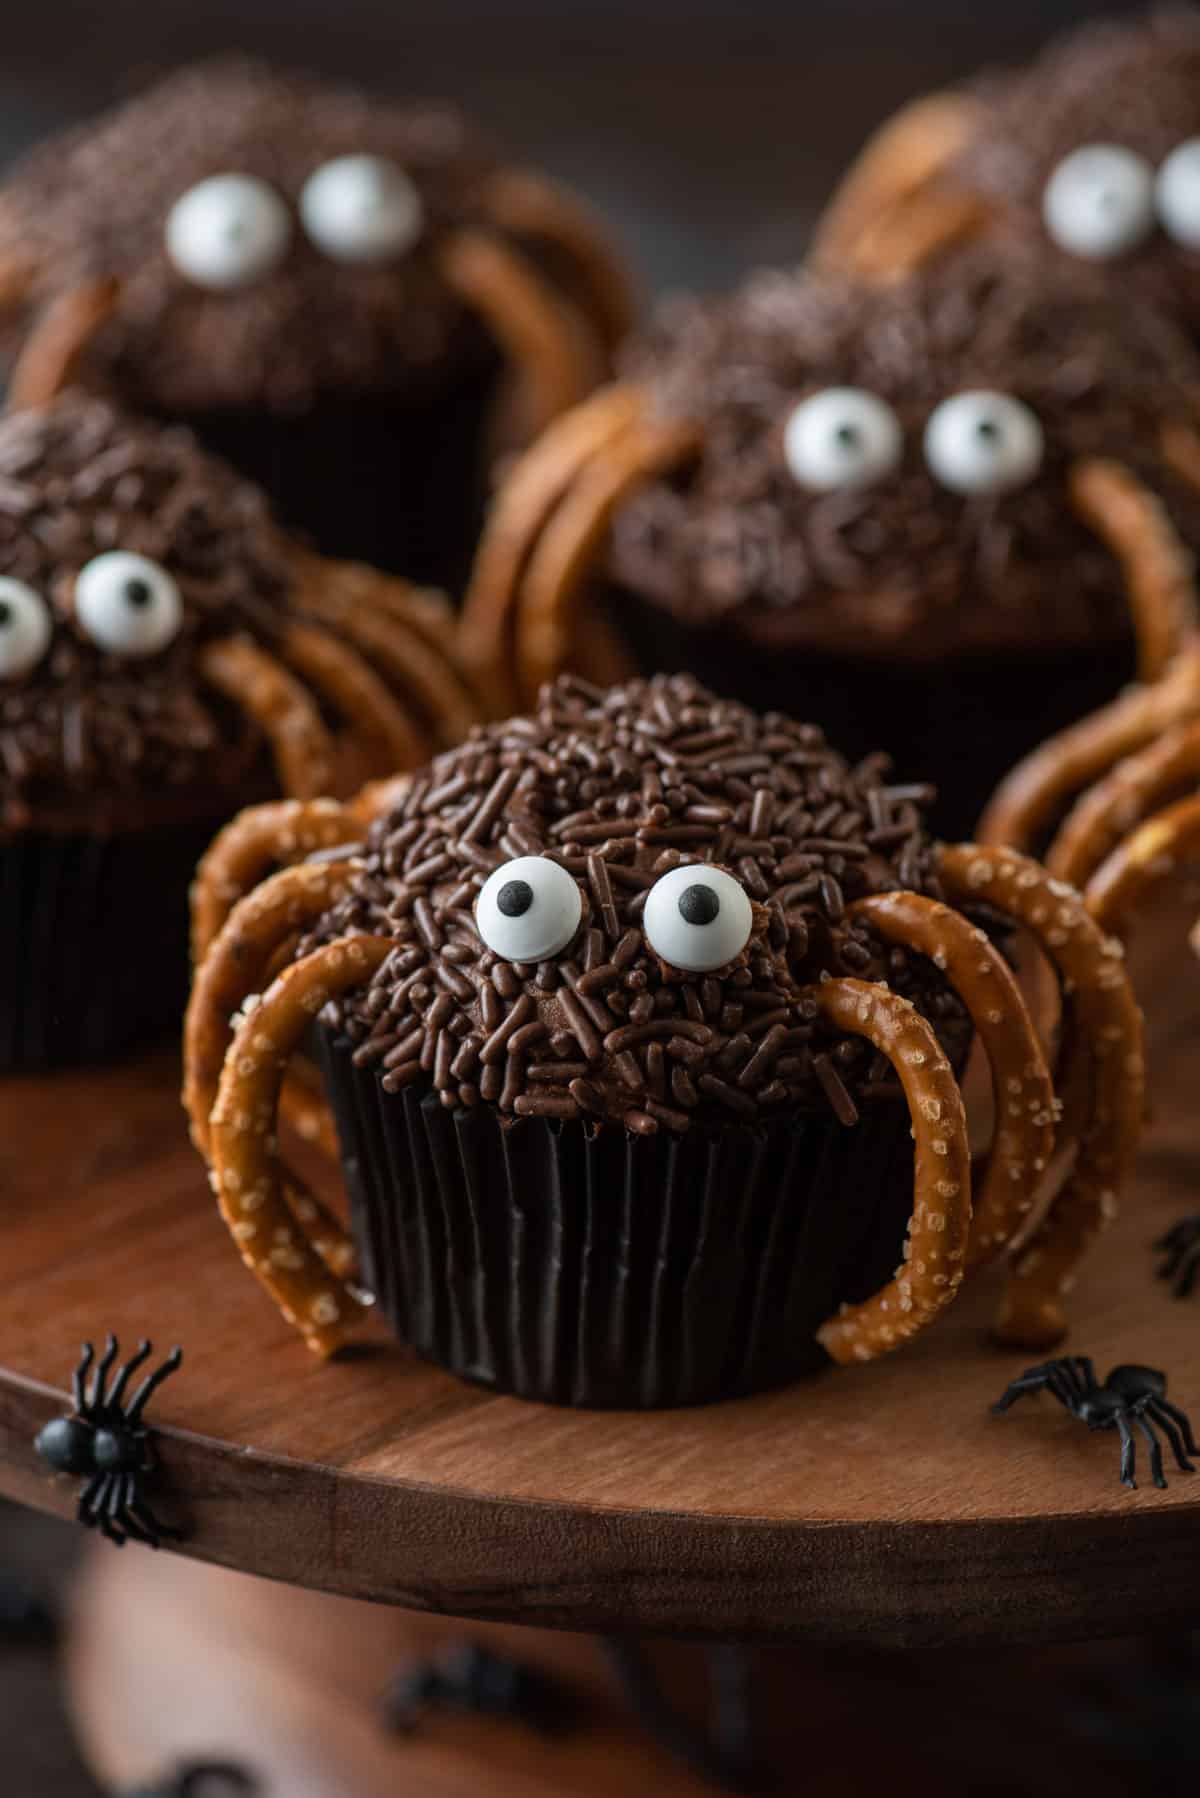 spider cupcakes on a wood surface with little black plastic spiders scattered around